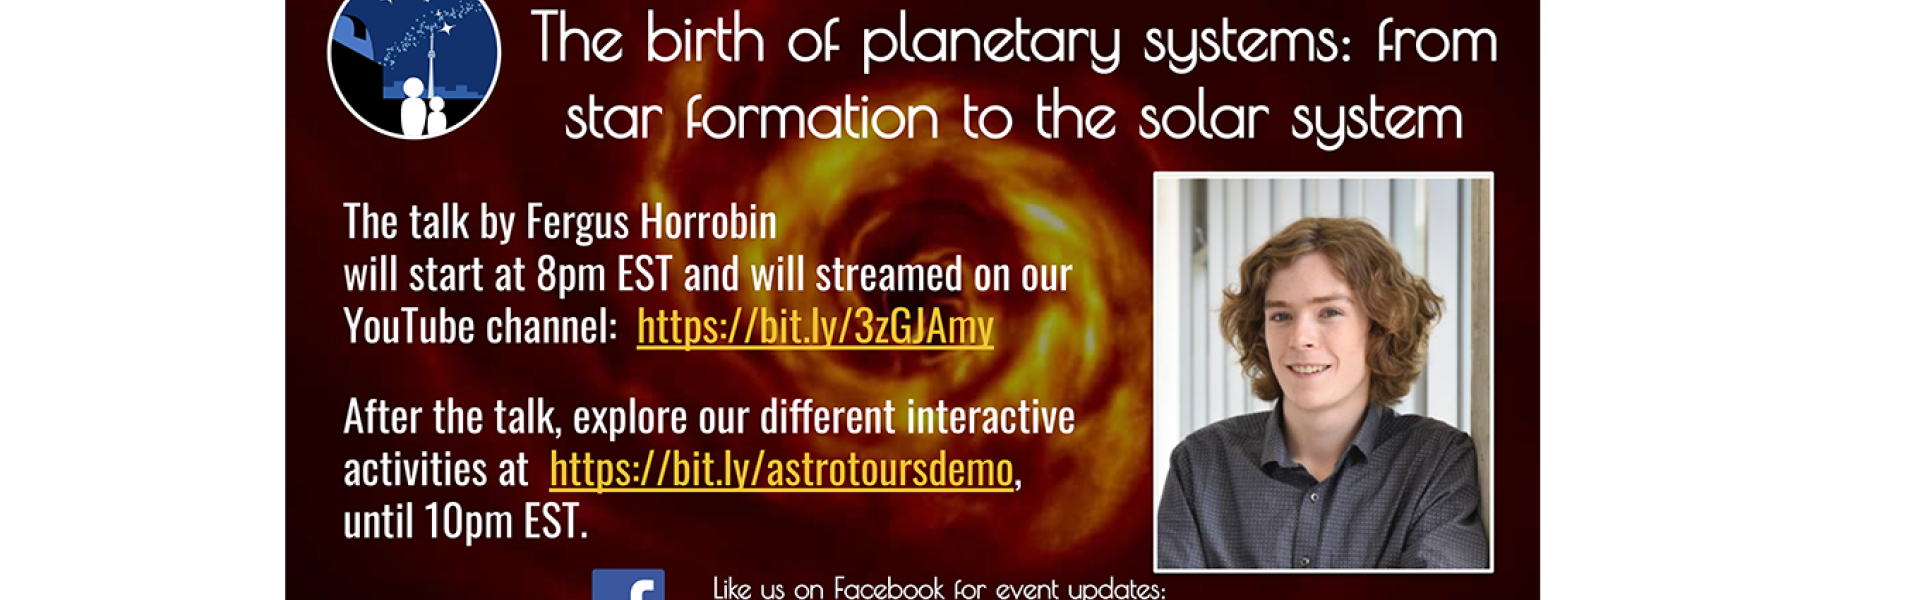 The Birth of Planetary Systems